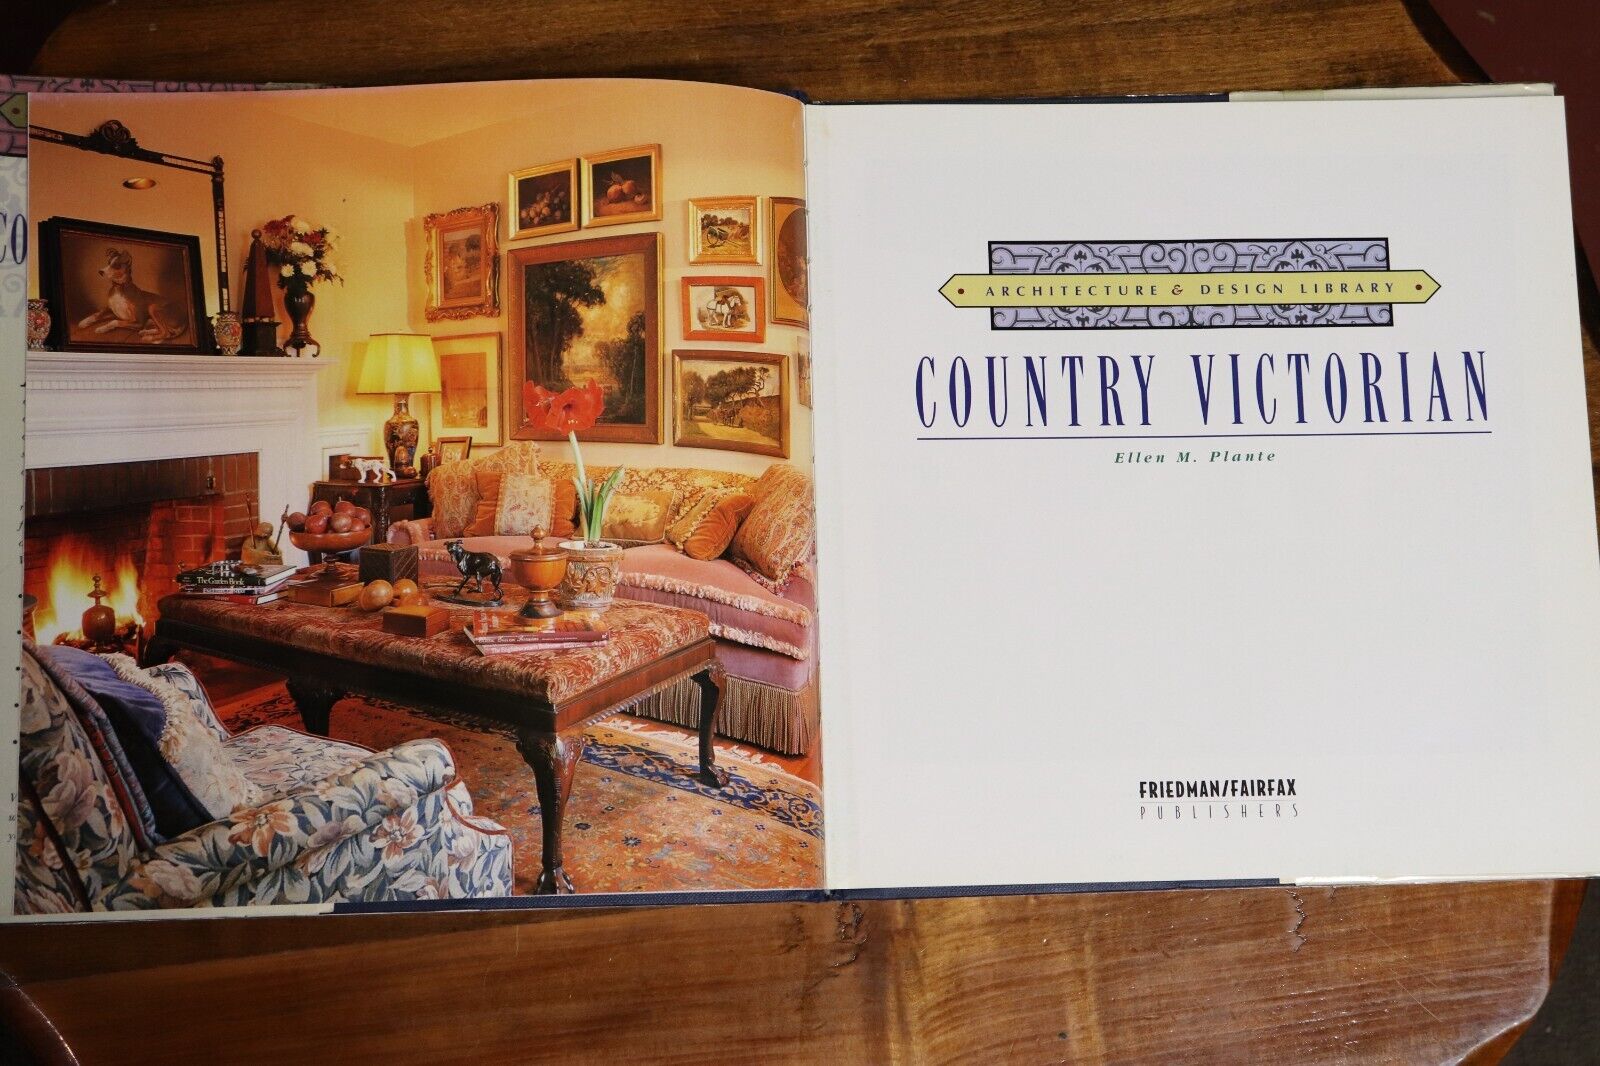 Country Victorian by Ellen M. Plante - 1997 - Architecture Reference Book